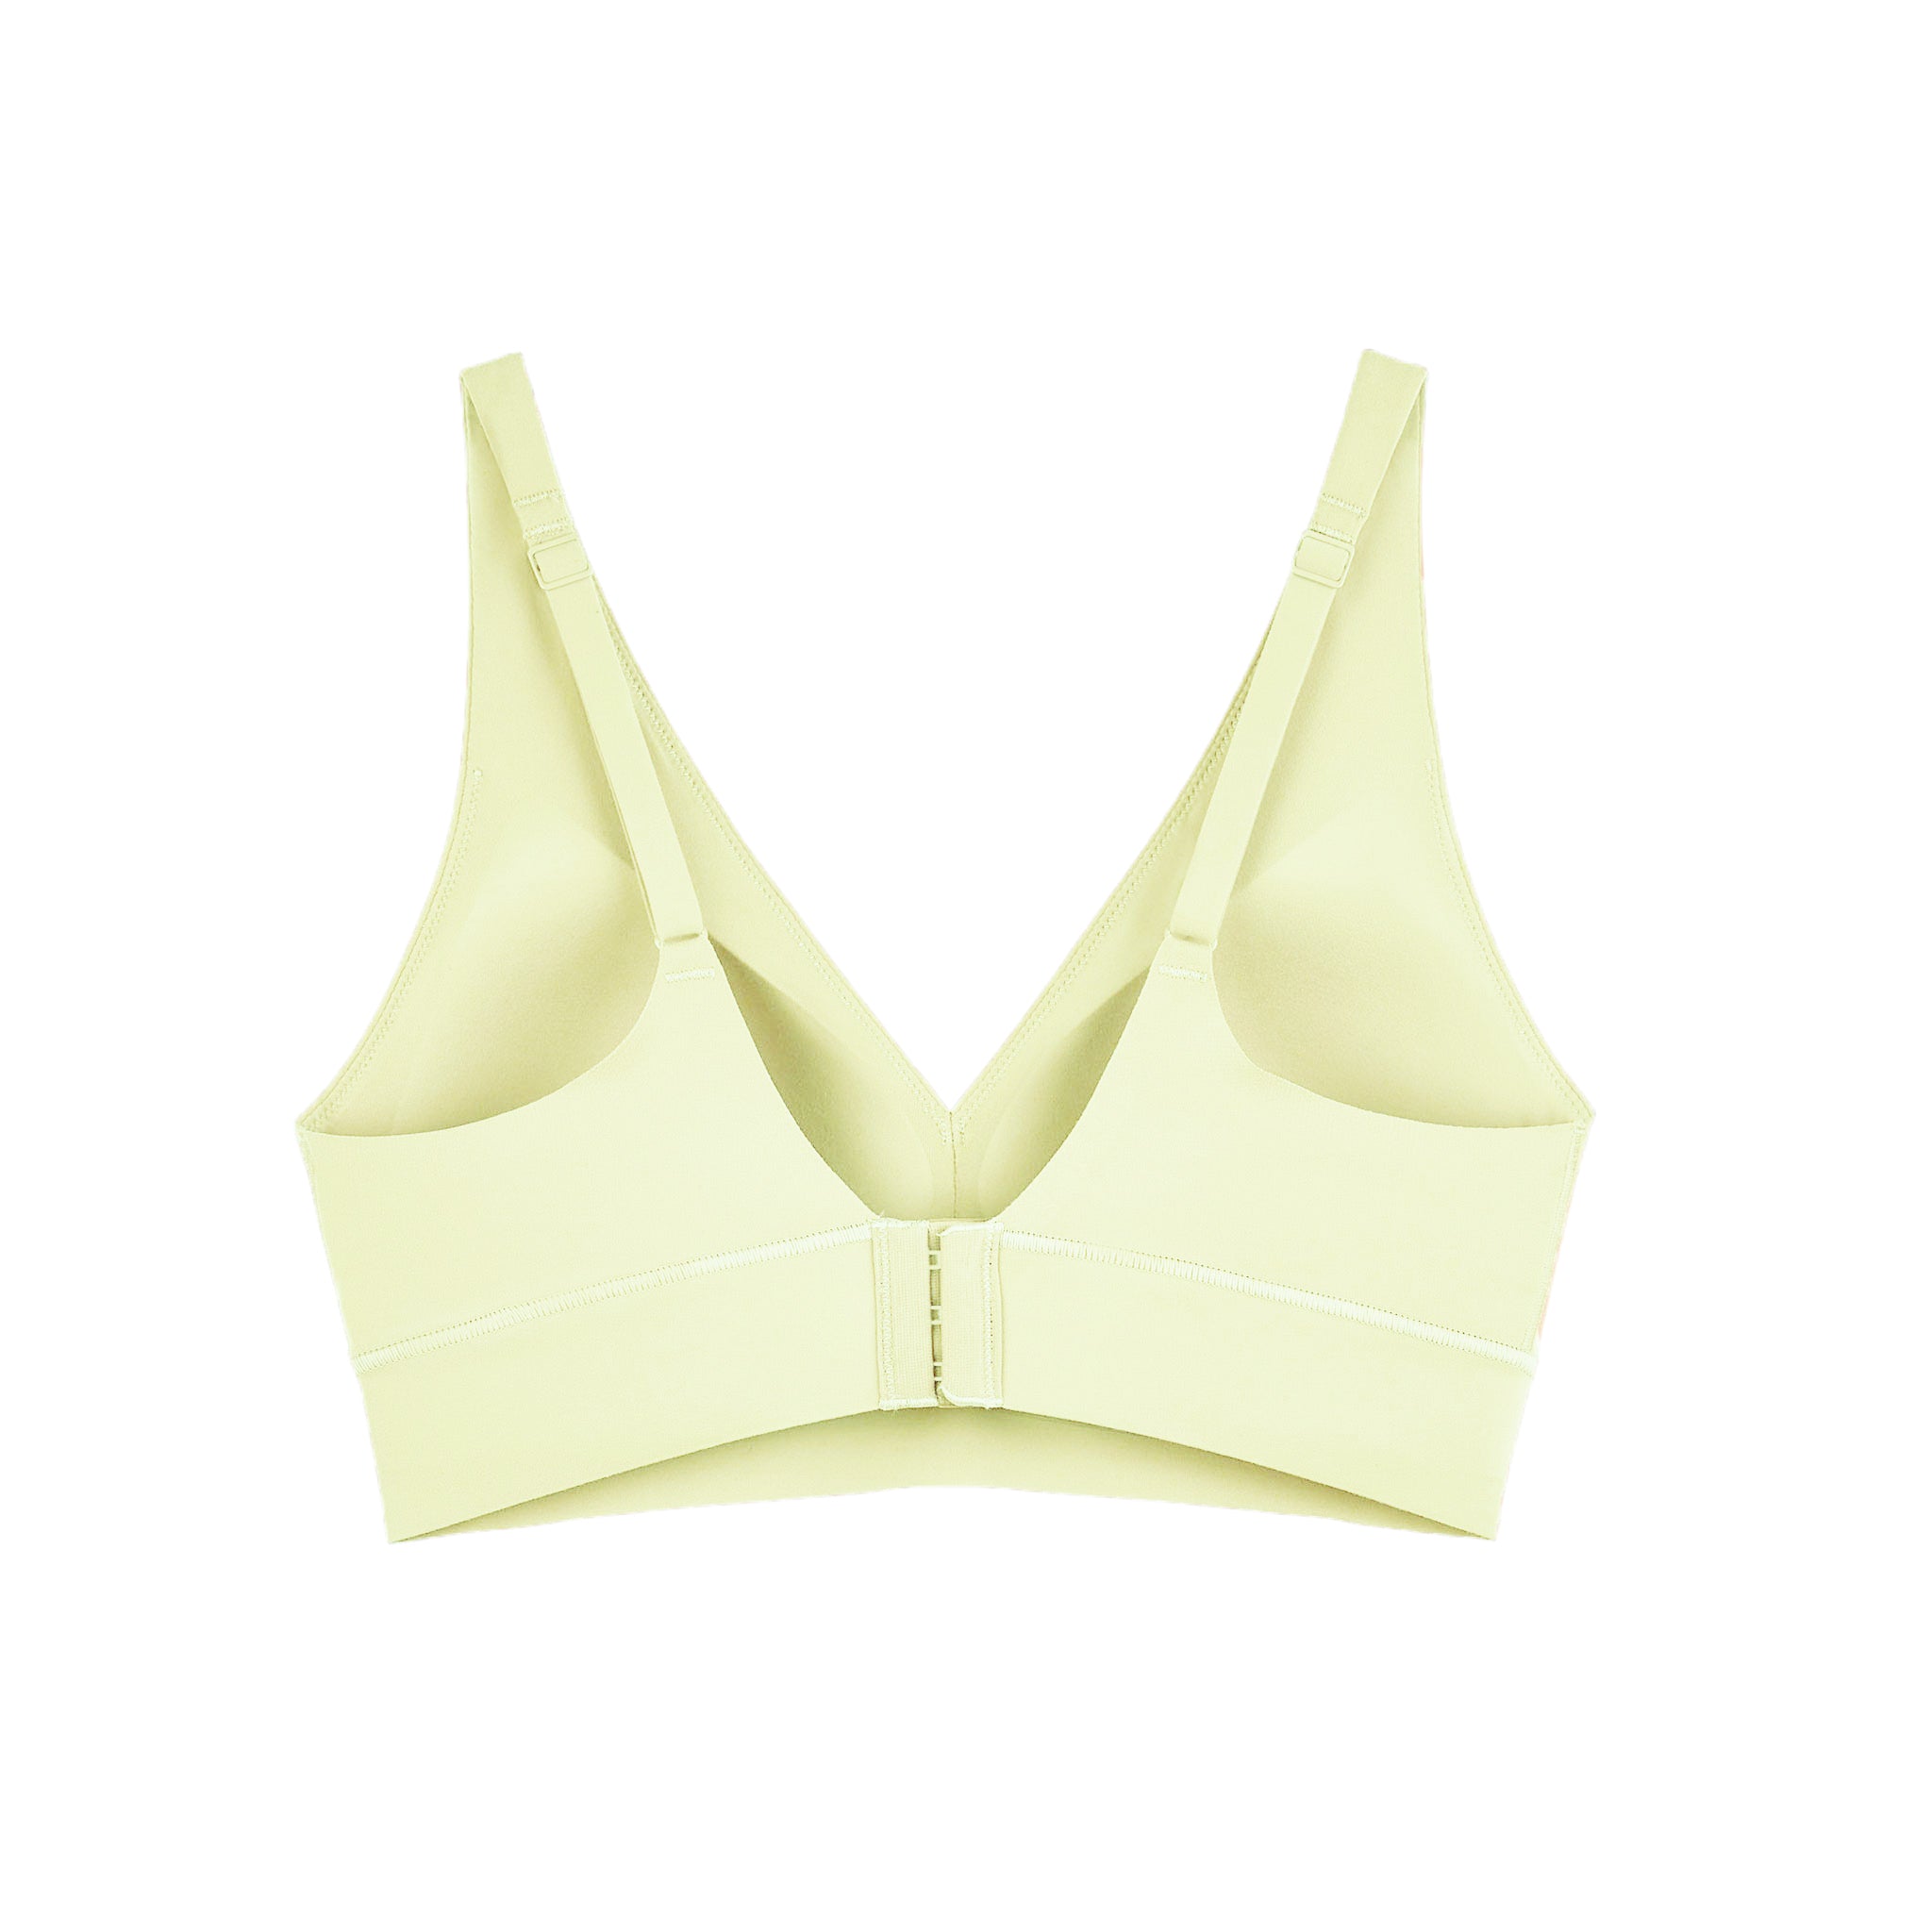 Floatley - Look no more! Slip into the Cozy Bra for the ultimate